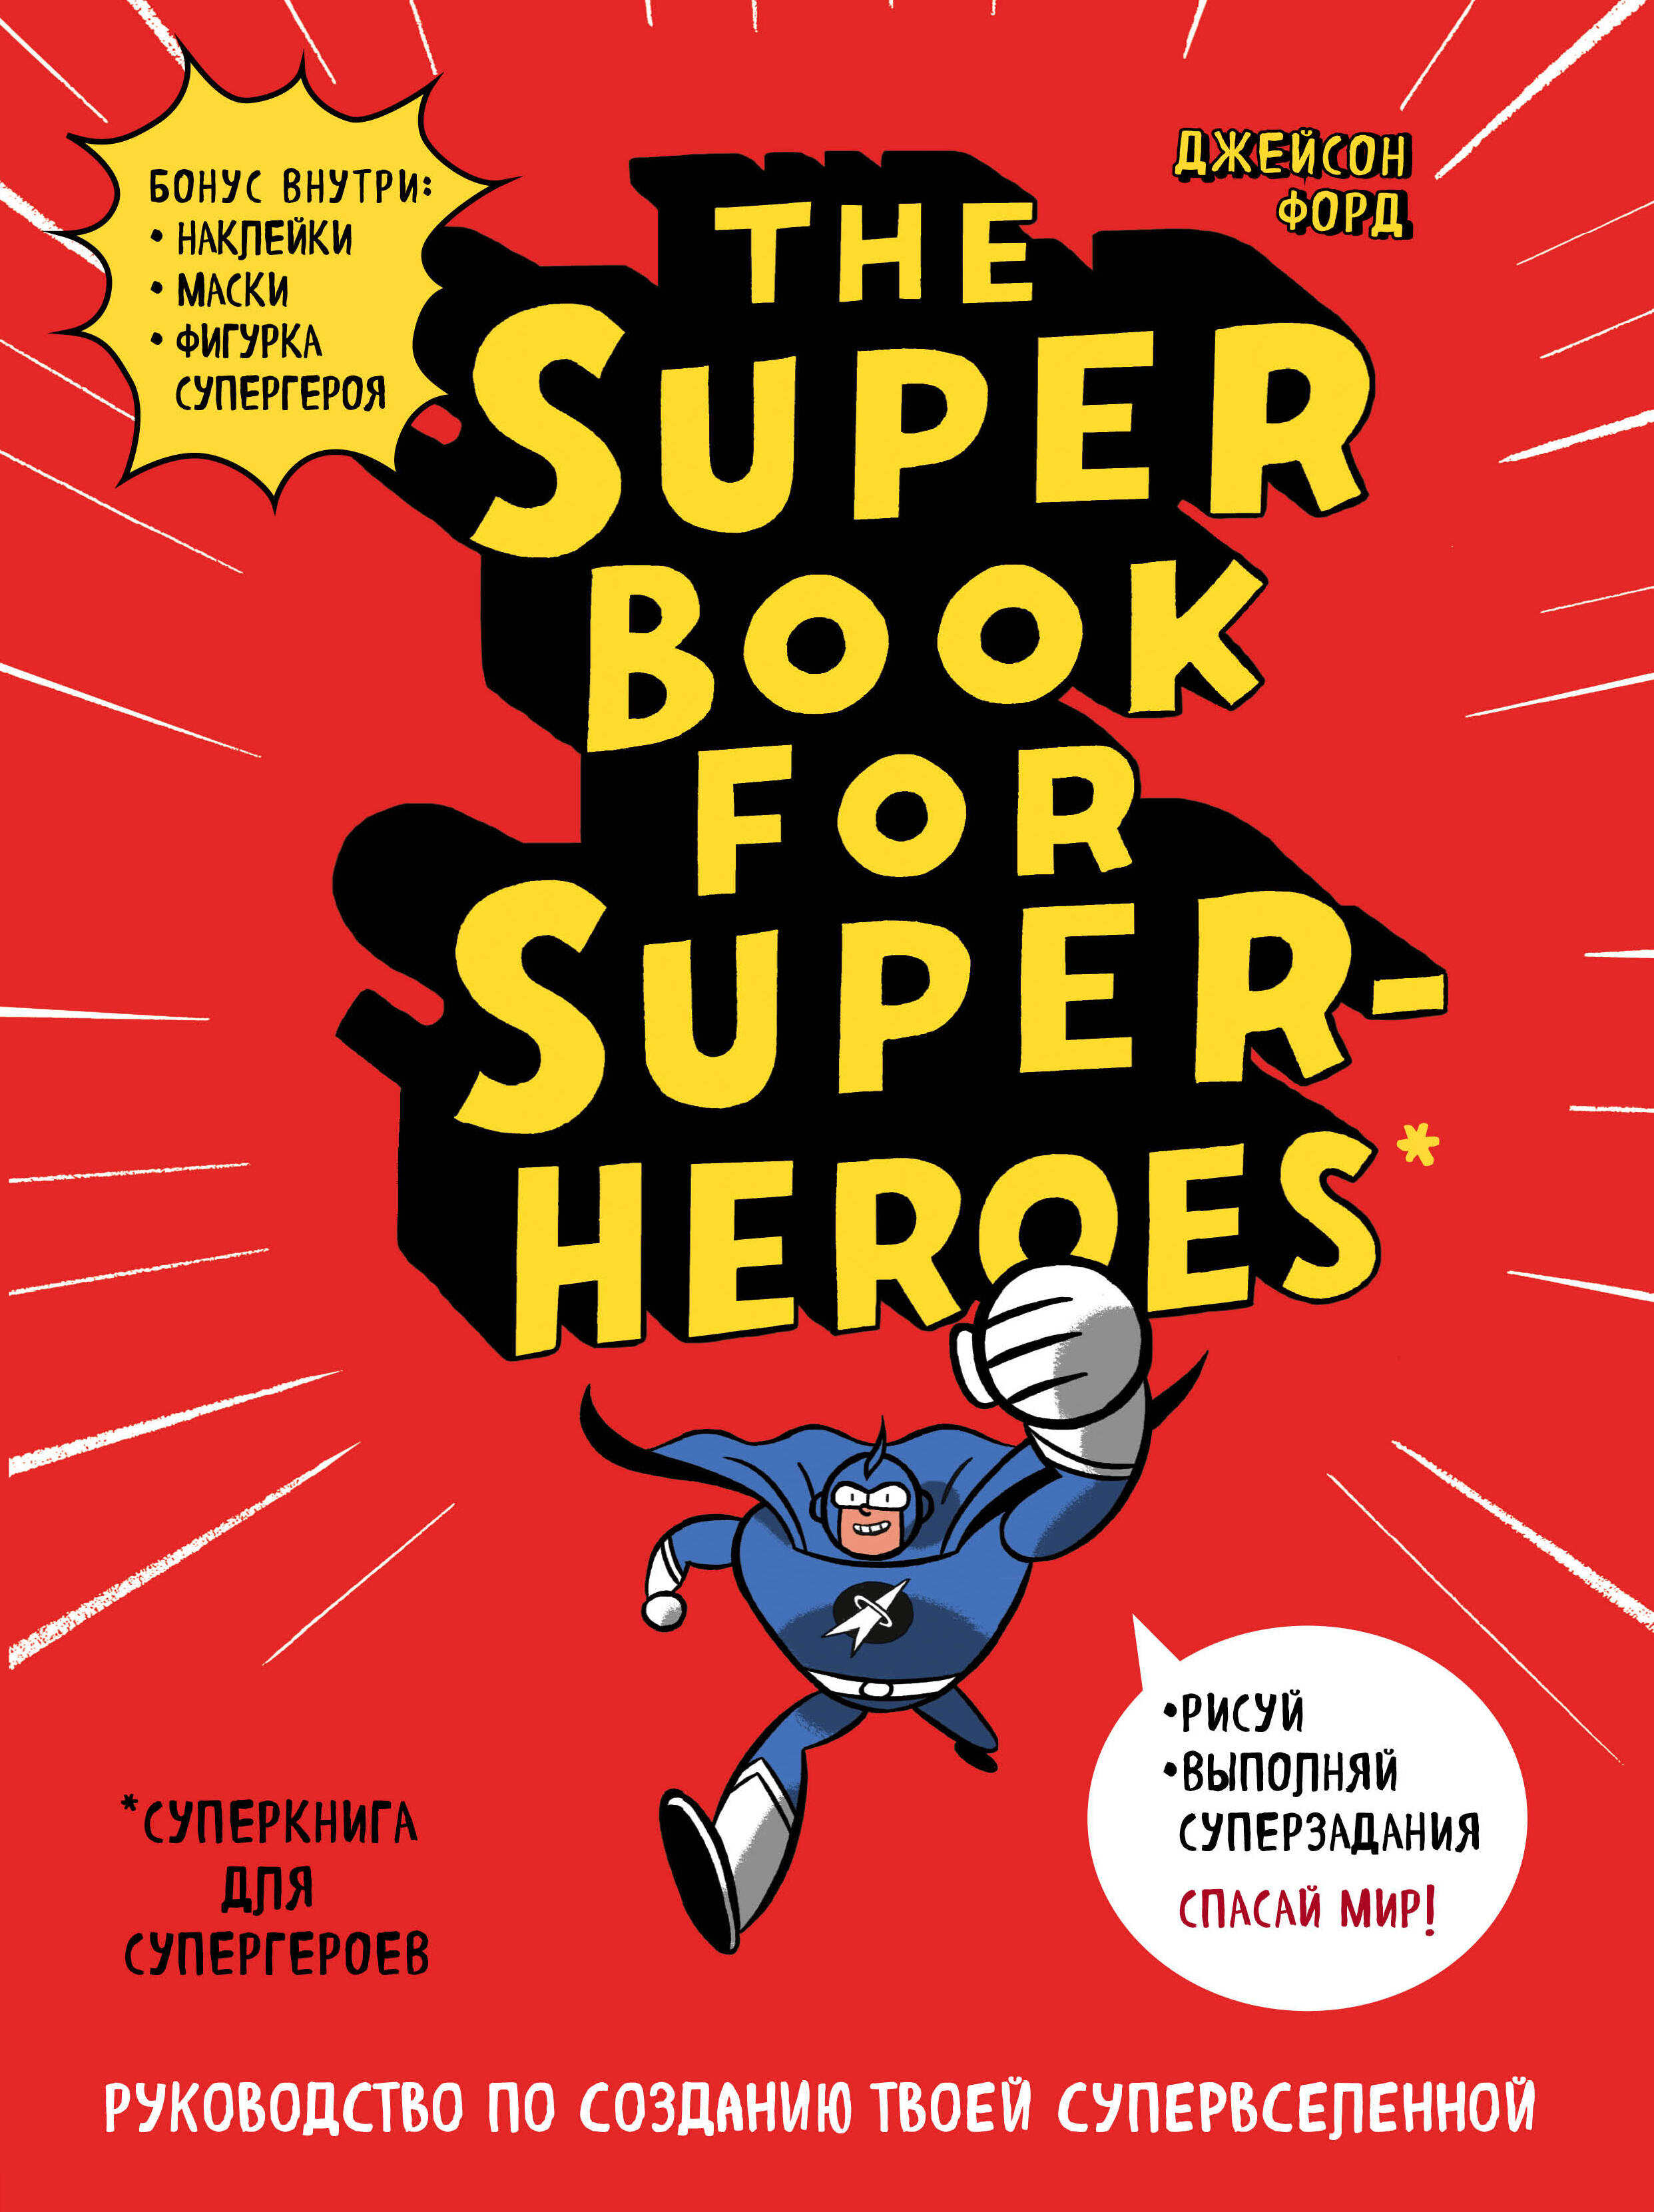 The Super book for superheroes (  ) A4, 128 